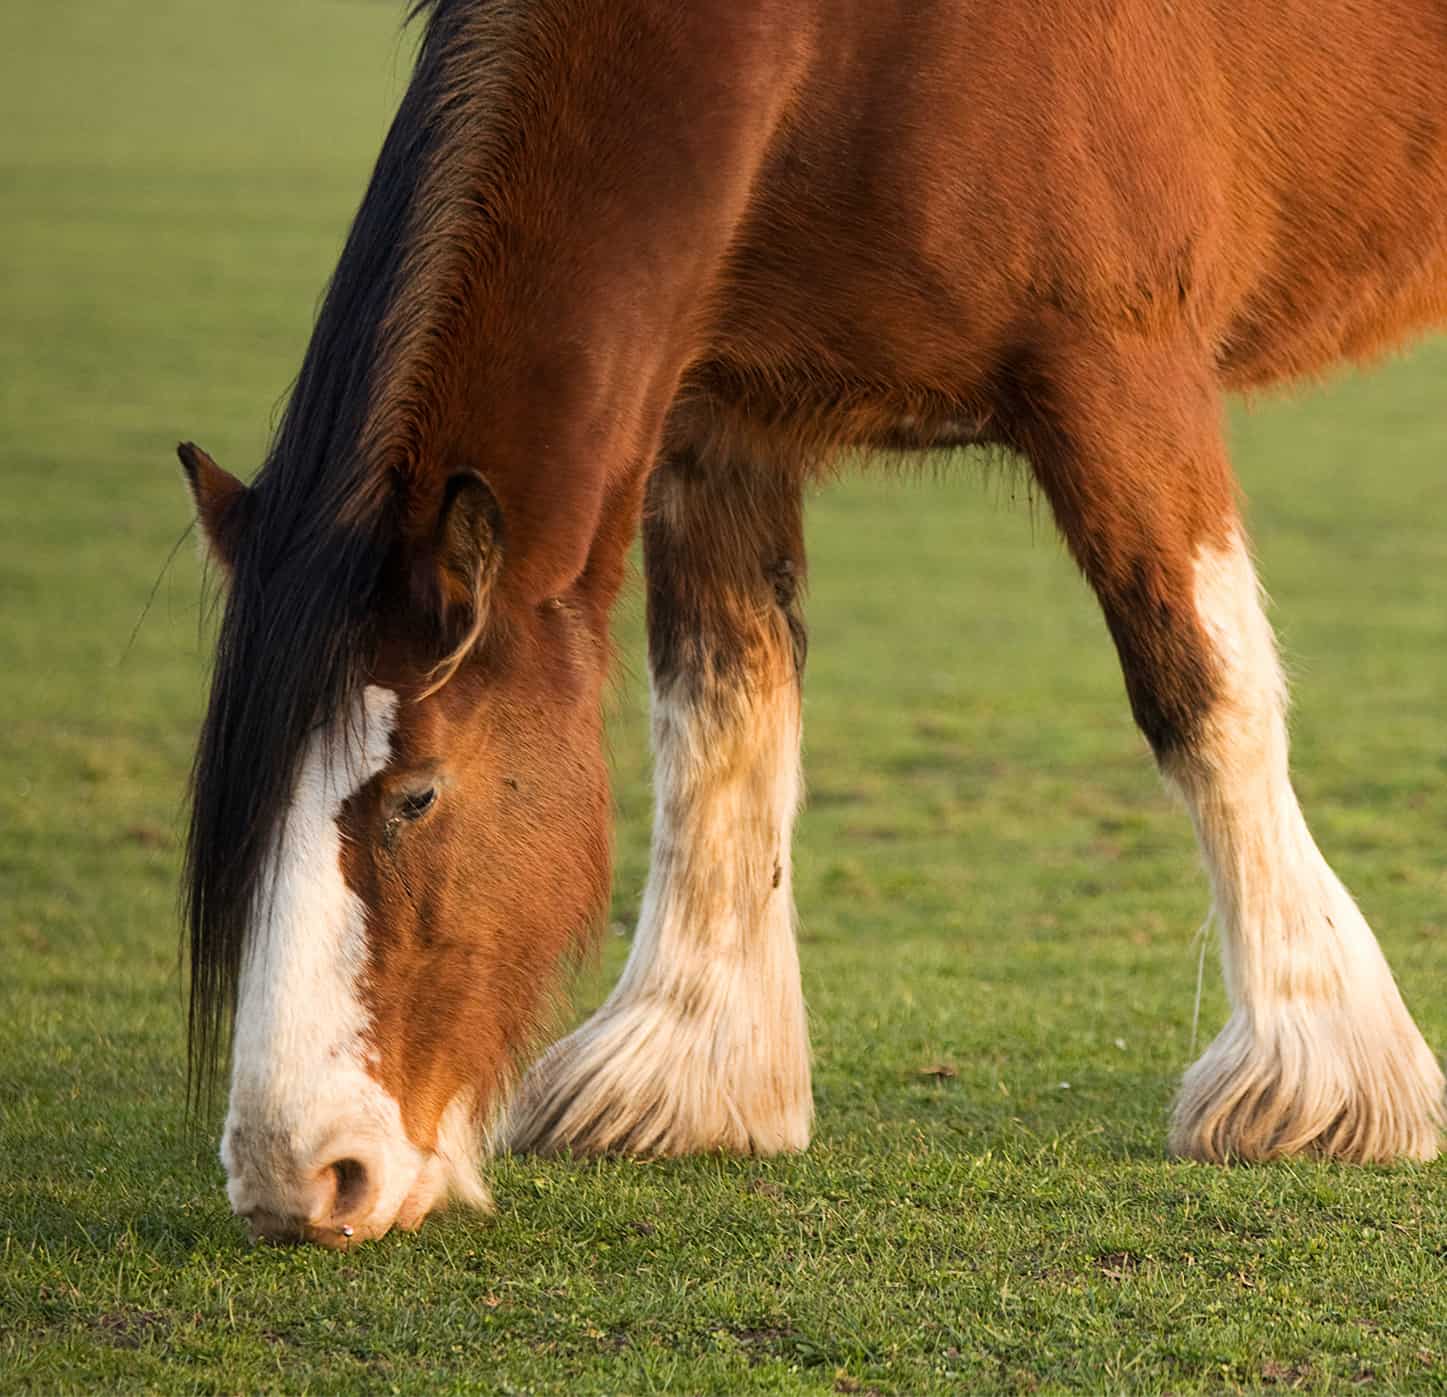 "Two Clydesdale horses grazing in a field in the evening light.For more, see my lightbox"